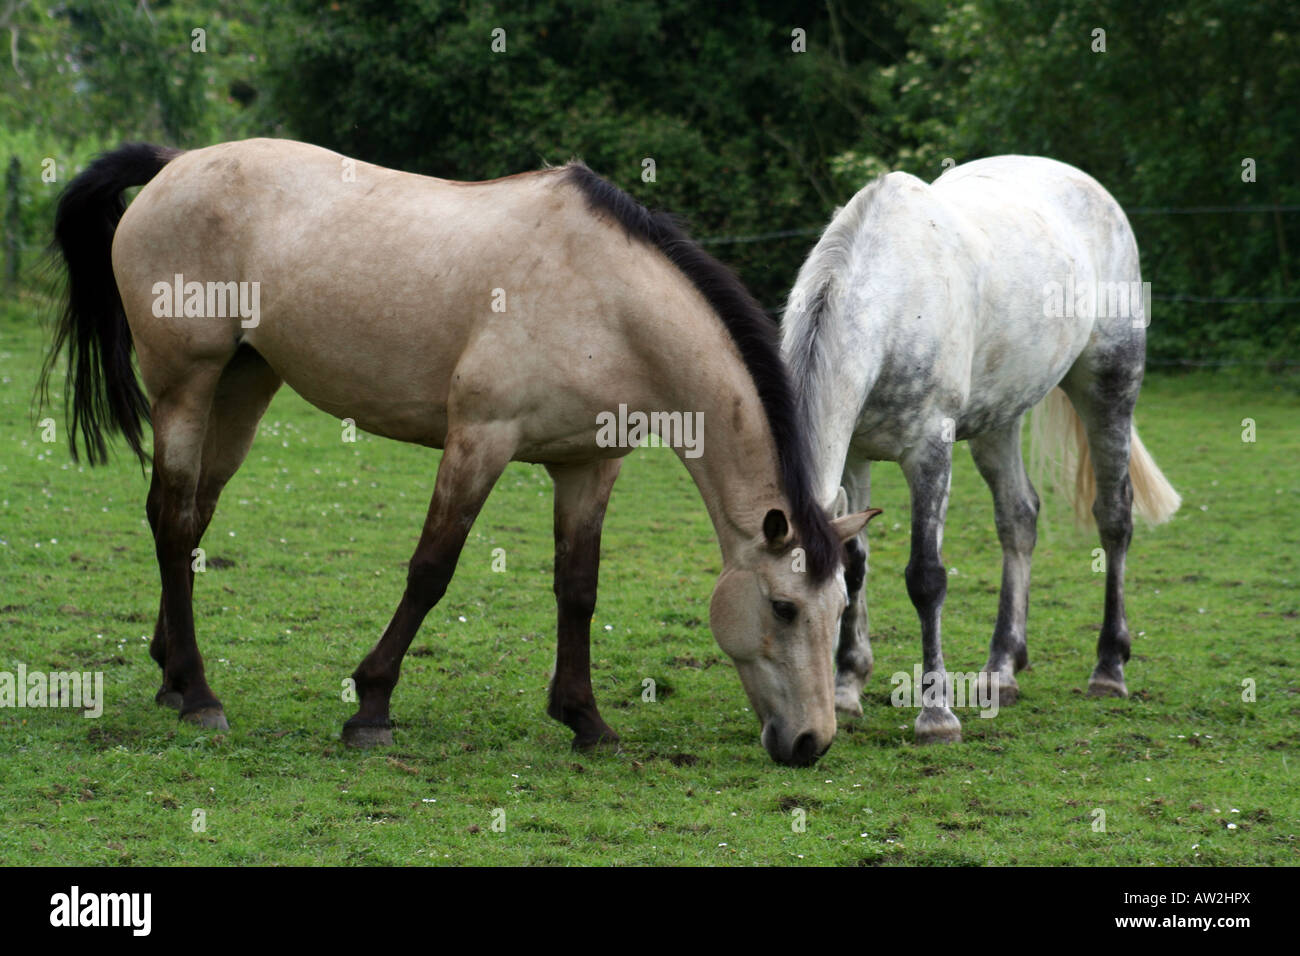 A light dappled brown and a dappled grey horse graze, superficially it looks like they share a head Stock Photo